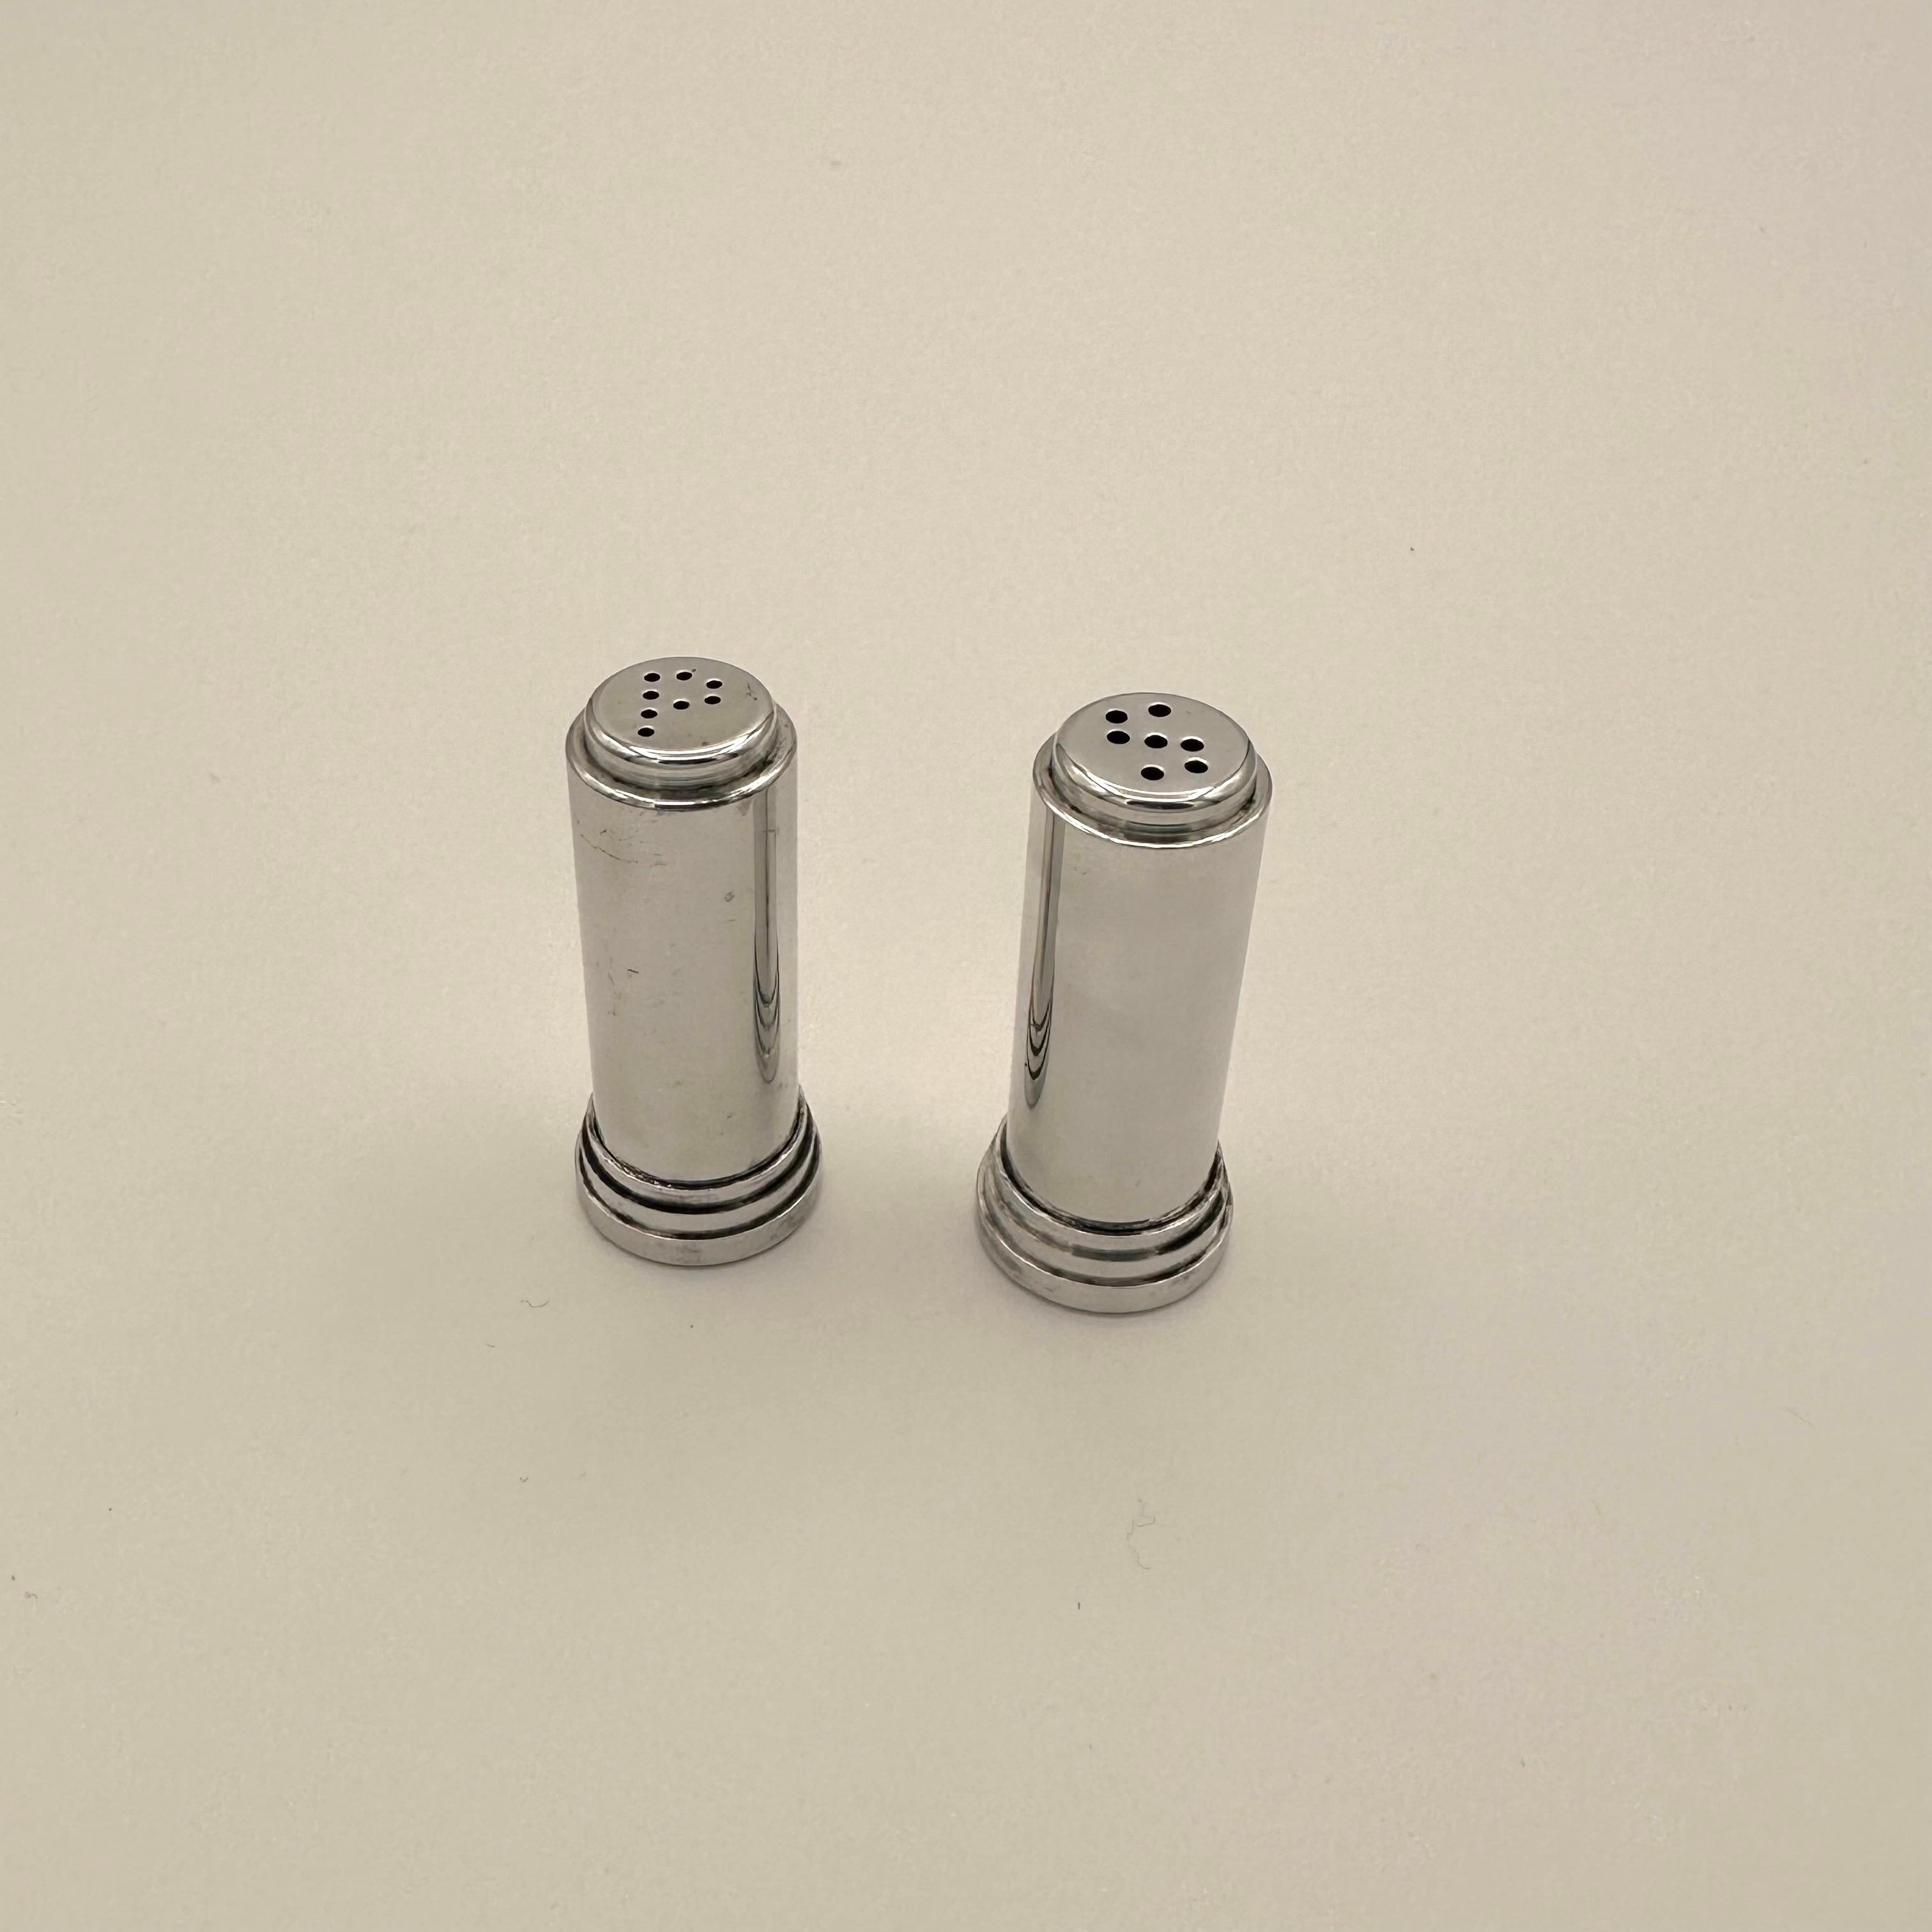 Small pair of vintage salt and pepper shakers with an Art Deco, Modernist, Machine Age style. Circular layered stepped base and round column form with a final stepped notch at the top. Salt and pepper are shaken through stylized holes on the top